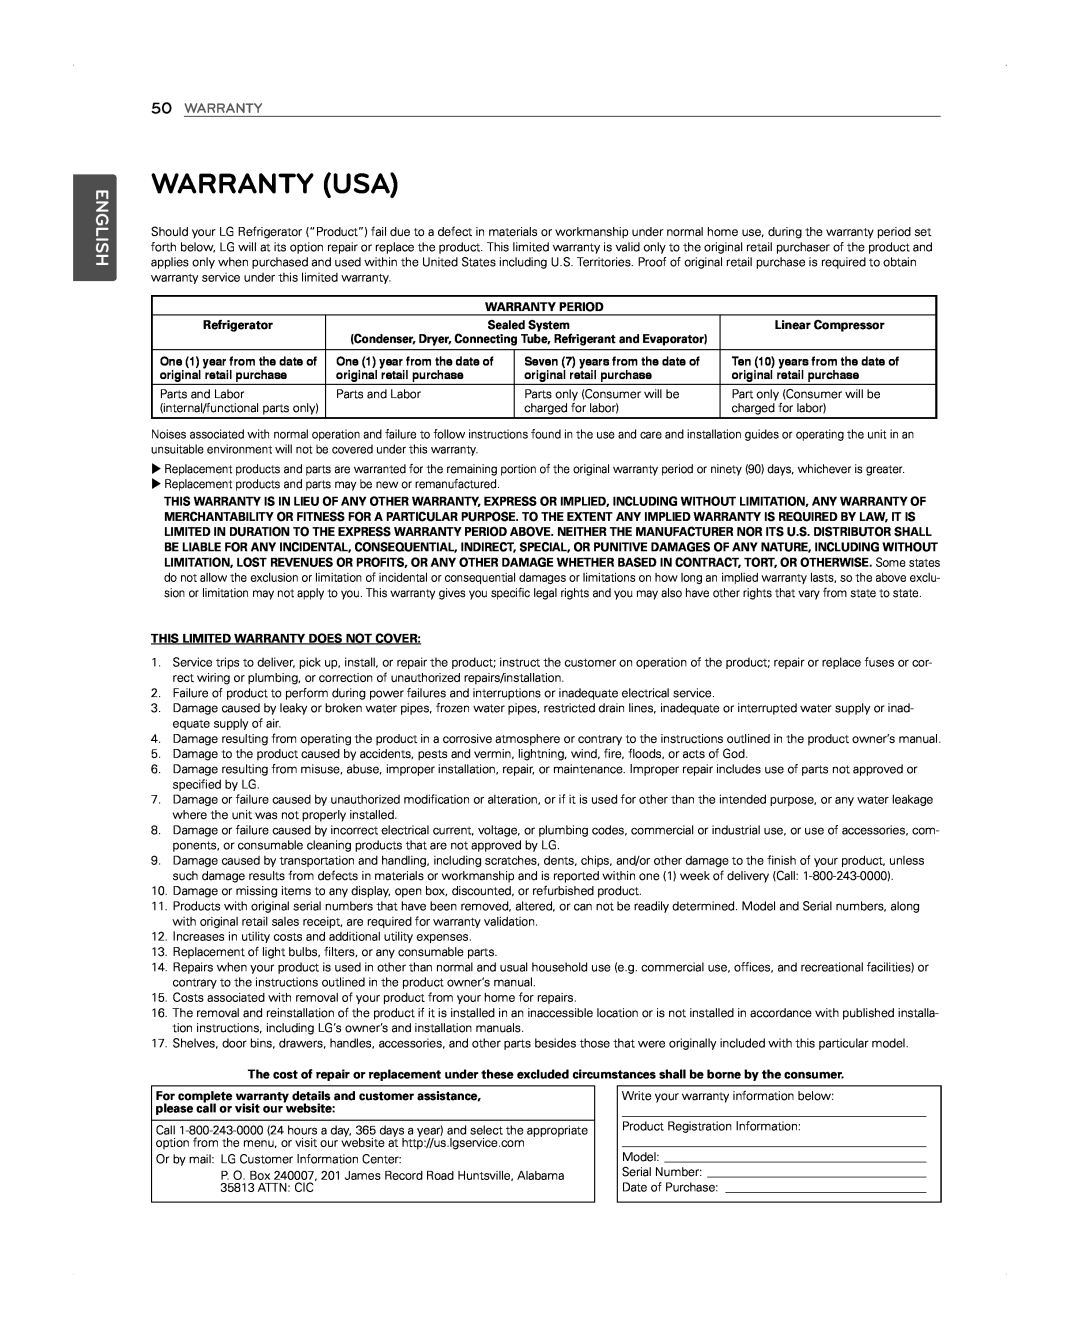 LG Electronics LFX31945ST owner manual Warranty Usa, English, Ten 10 years from the date of, original retail purchase 